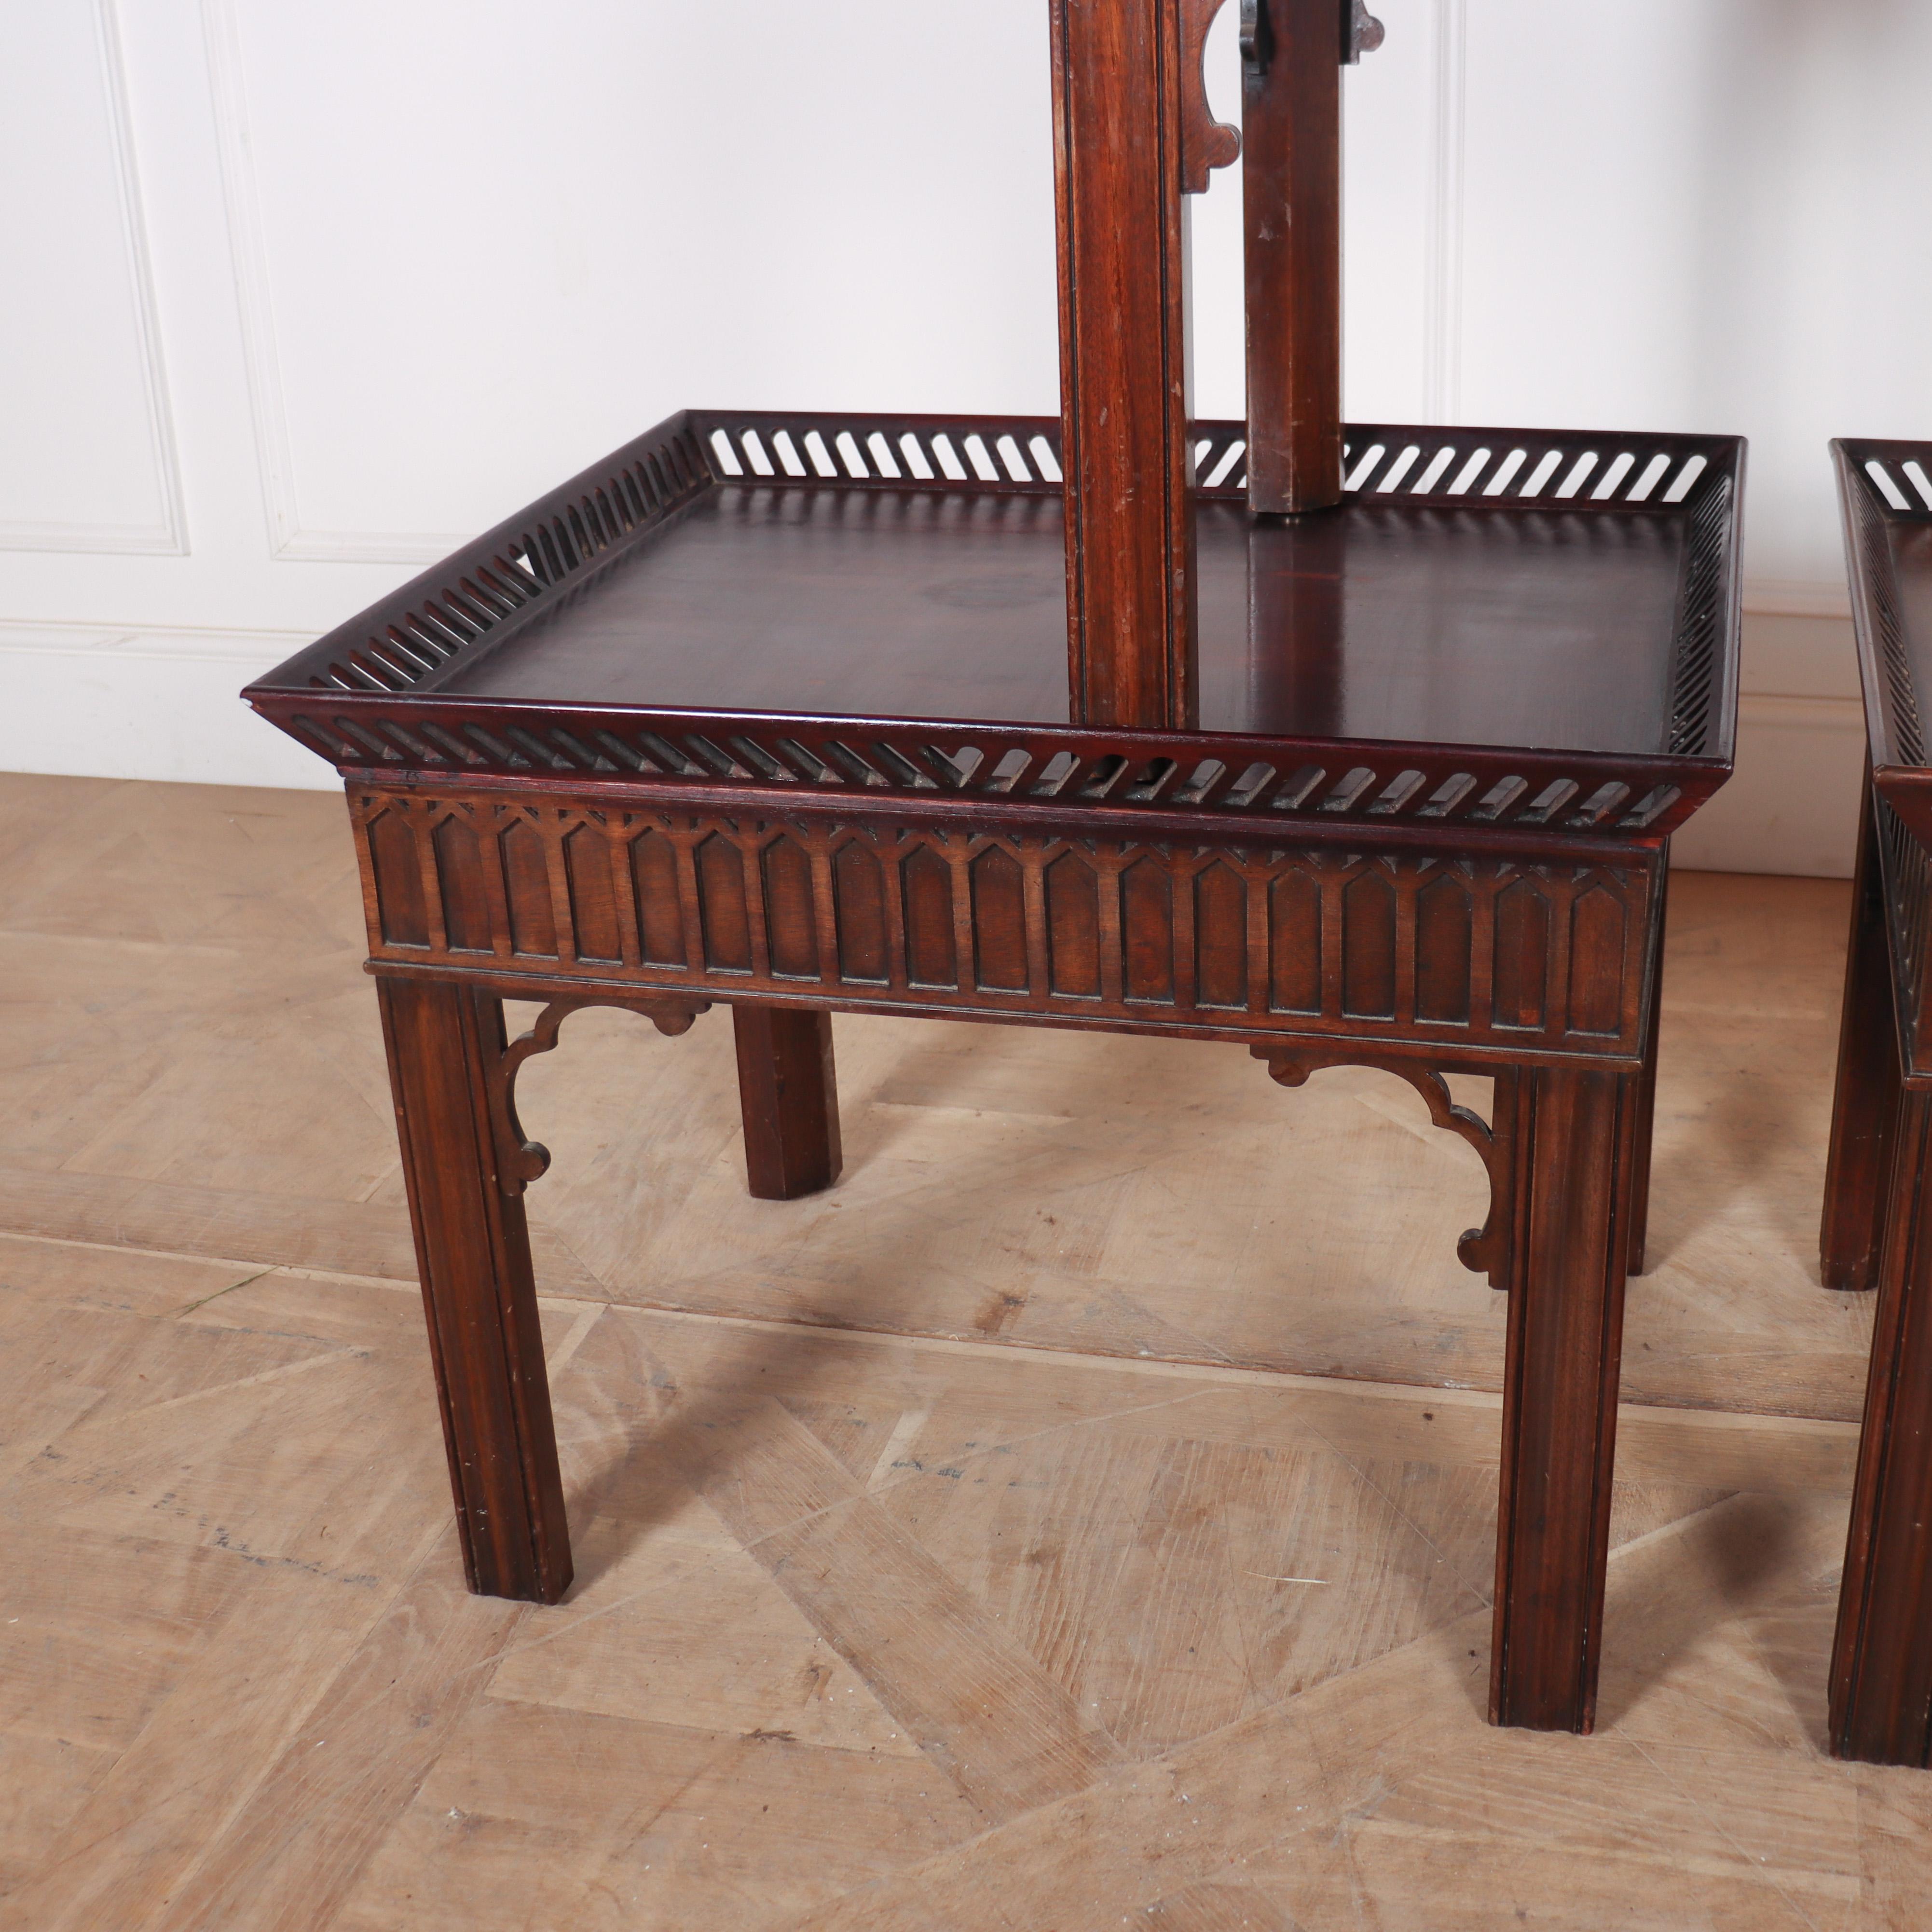 Set of 3 1920s English mahogany lamp tables. Good colour and decoration.

Reference: 7936

Dimensions
28.5 inches (72 cms) Wide
24.5 inches (62 cms) Deep
22.5 inches (57 cms) High